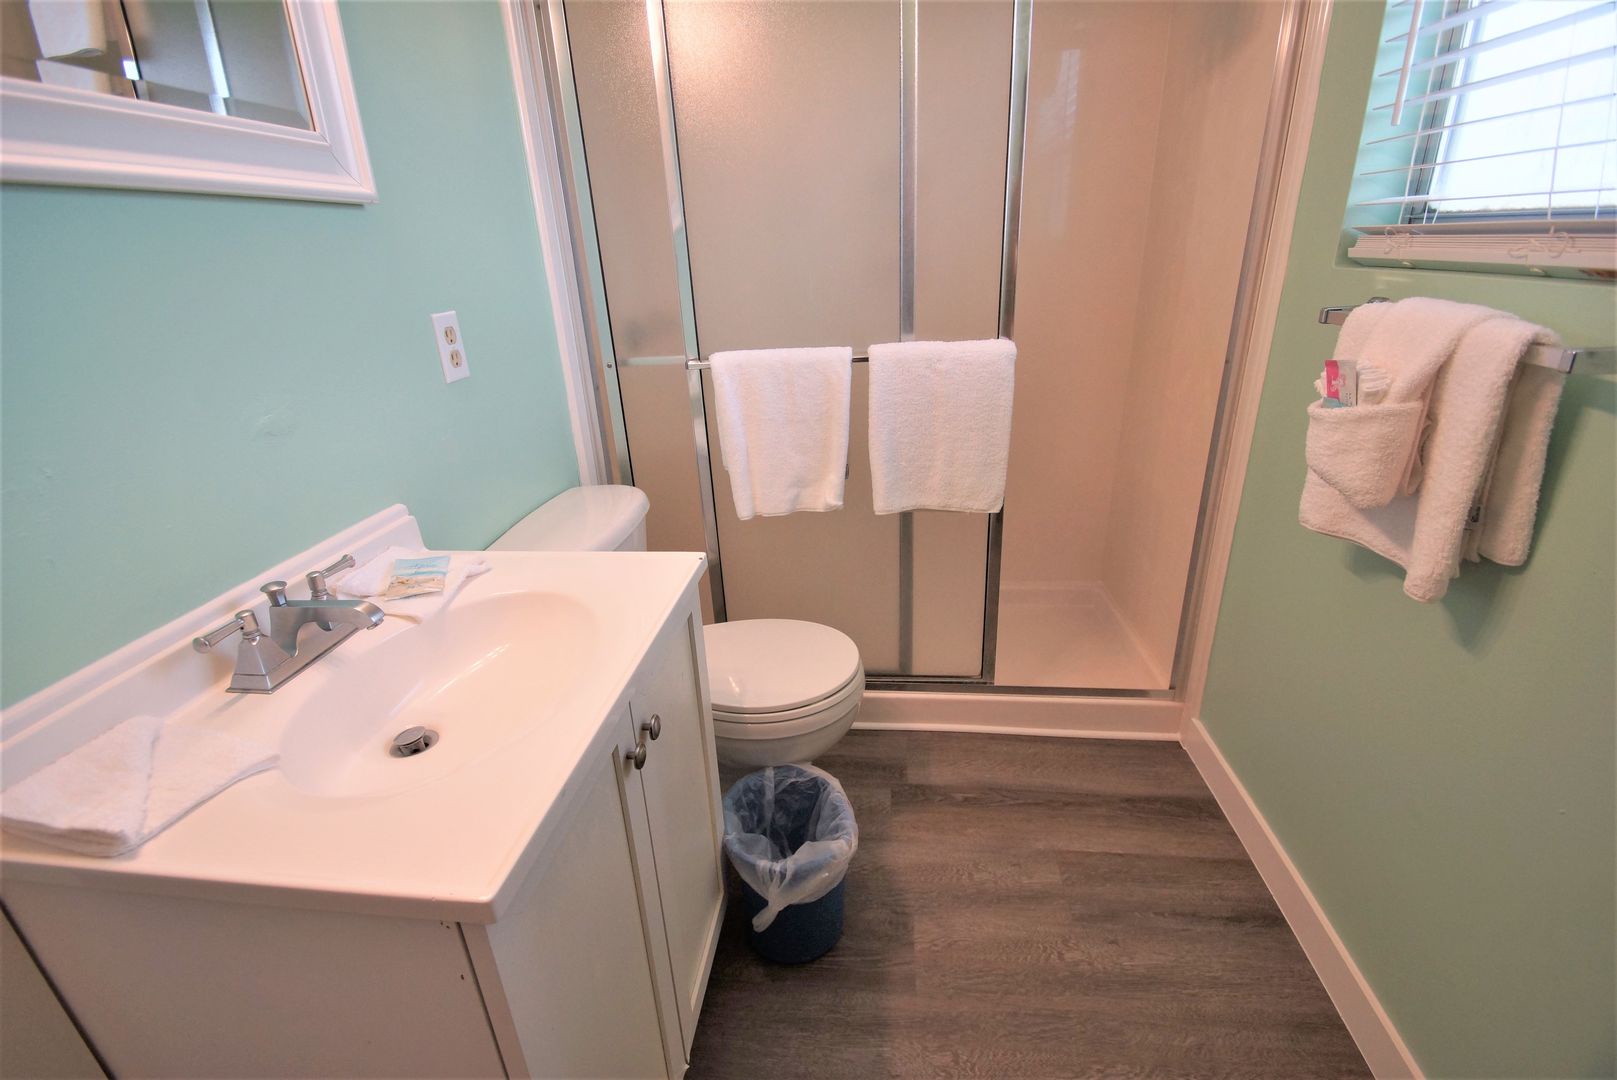 Shared hall bath with walk-in shower